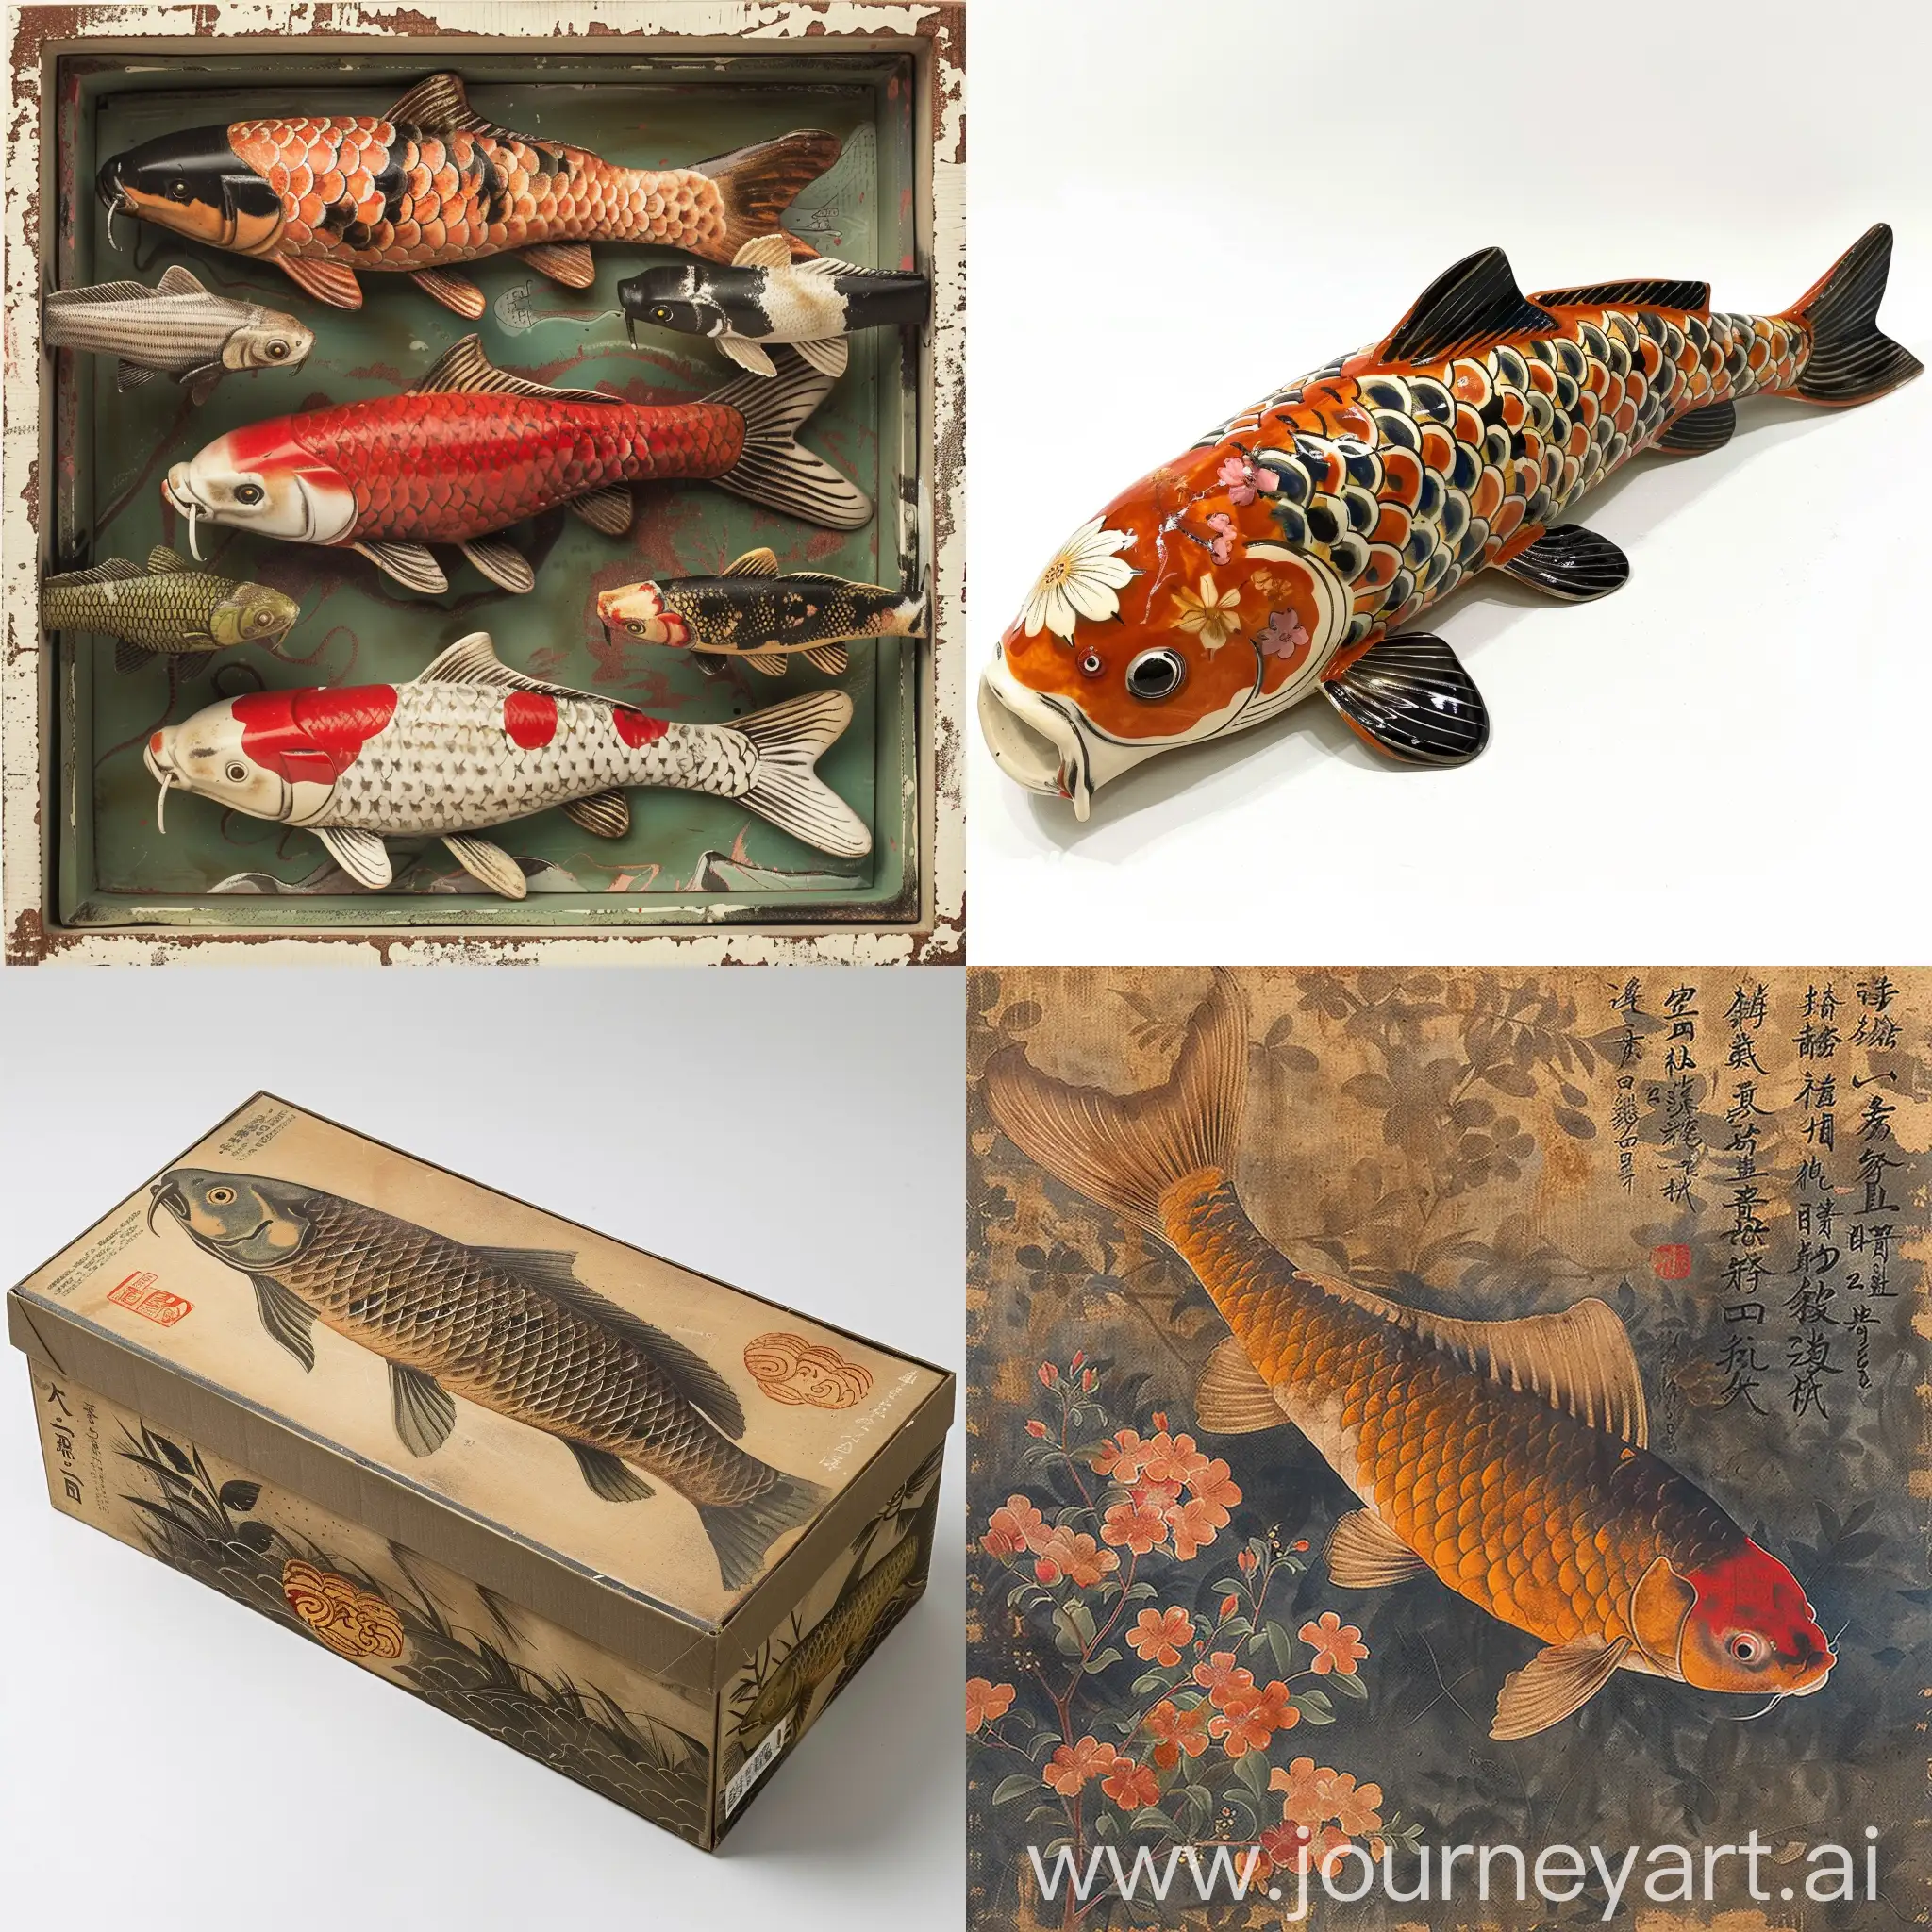 generic Japanese commercial industrial carp arts box